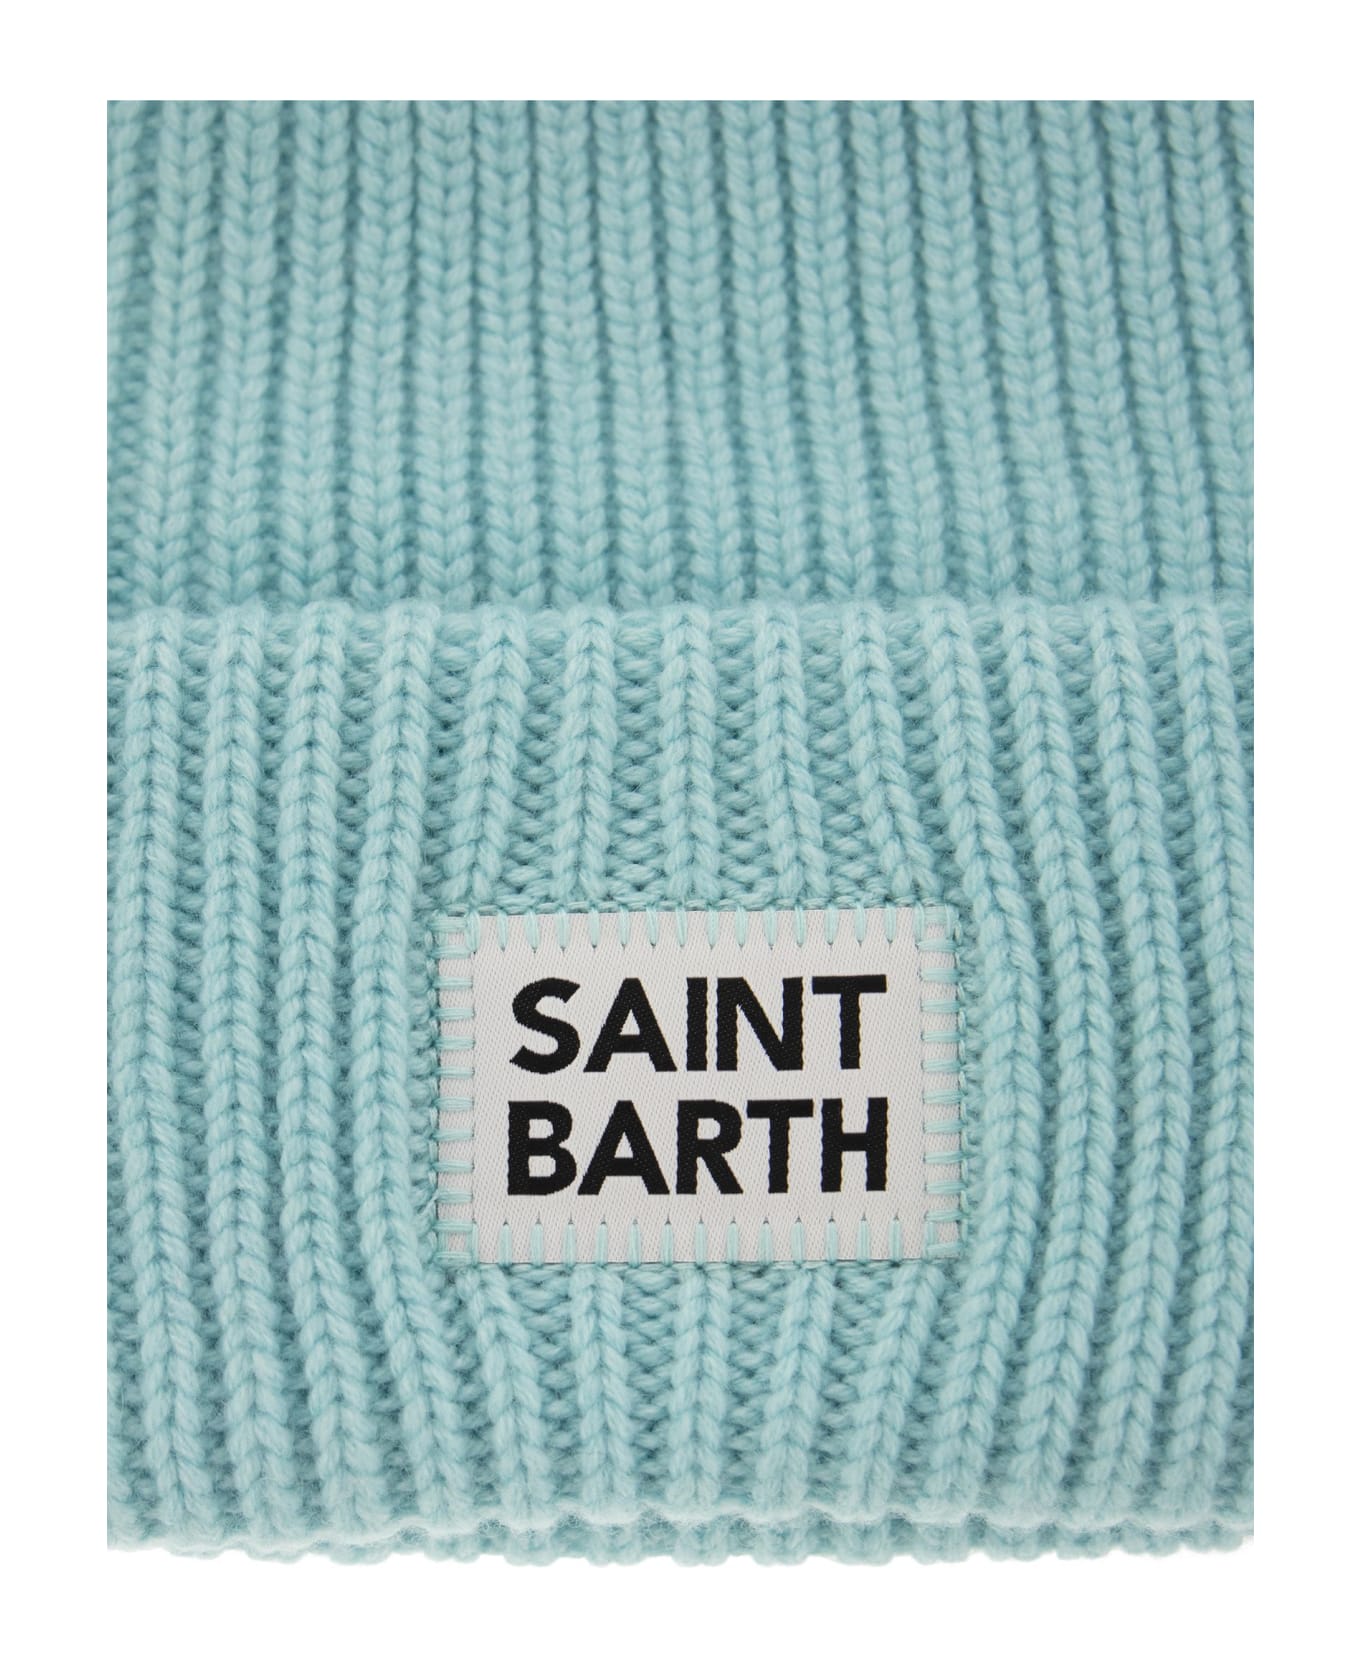 MC2 Saint Barth Berry - Mixed Wool And Cashmere Cap - Water Green